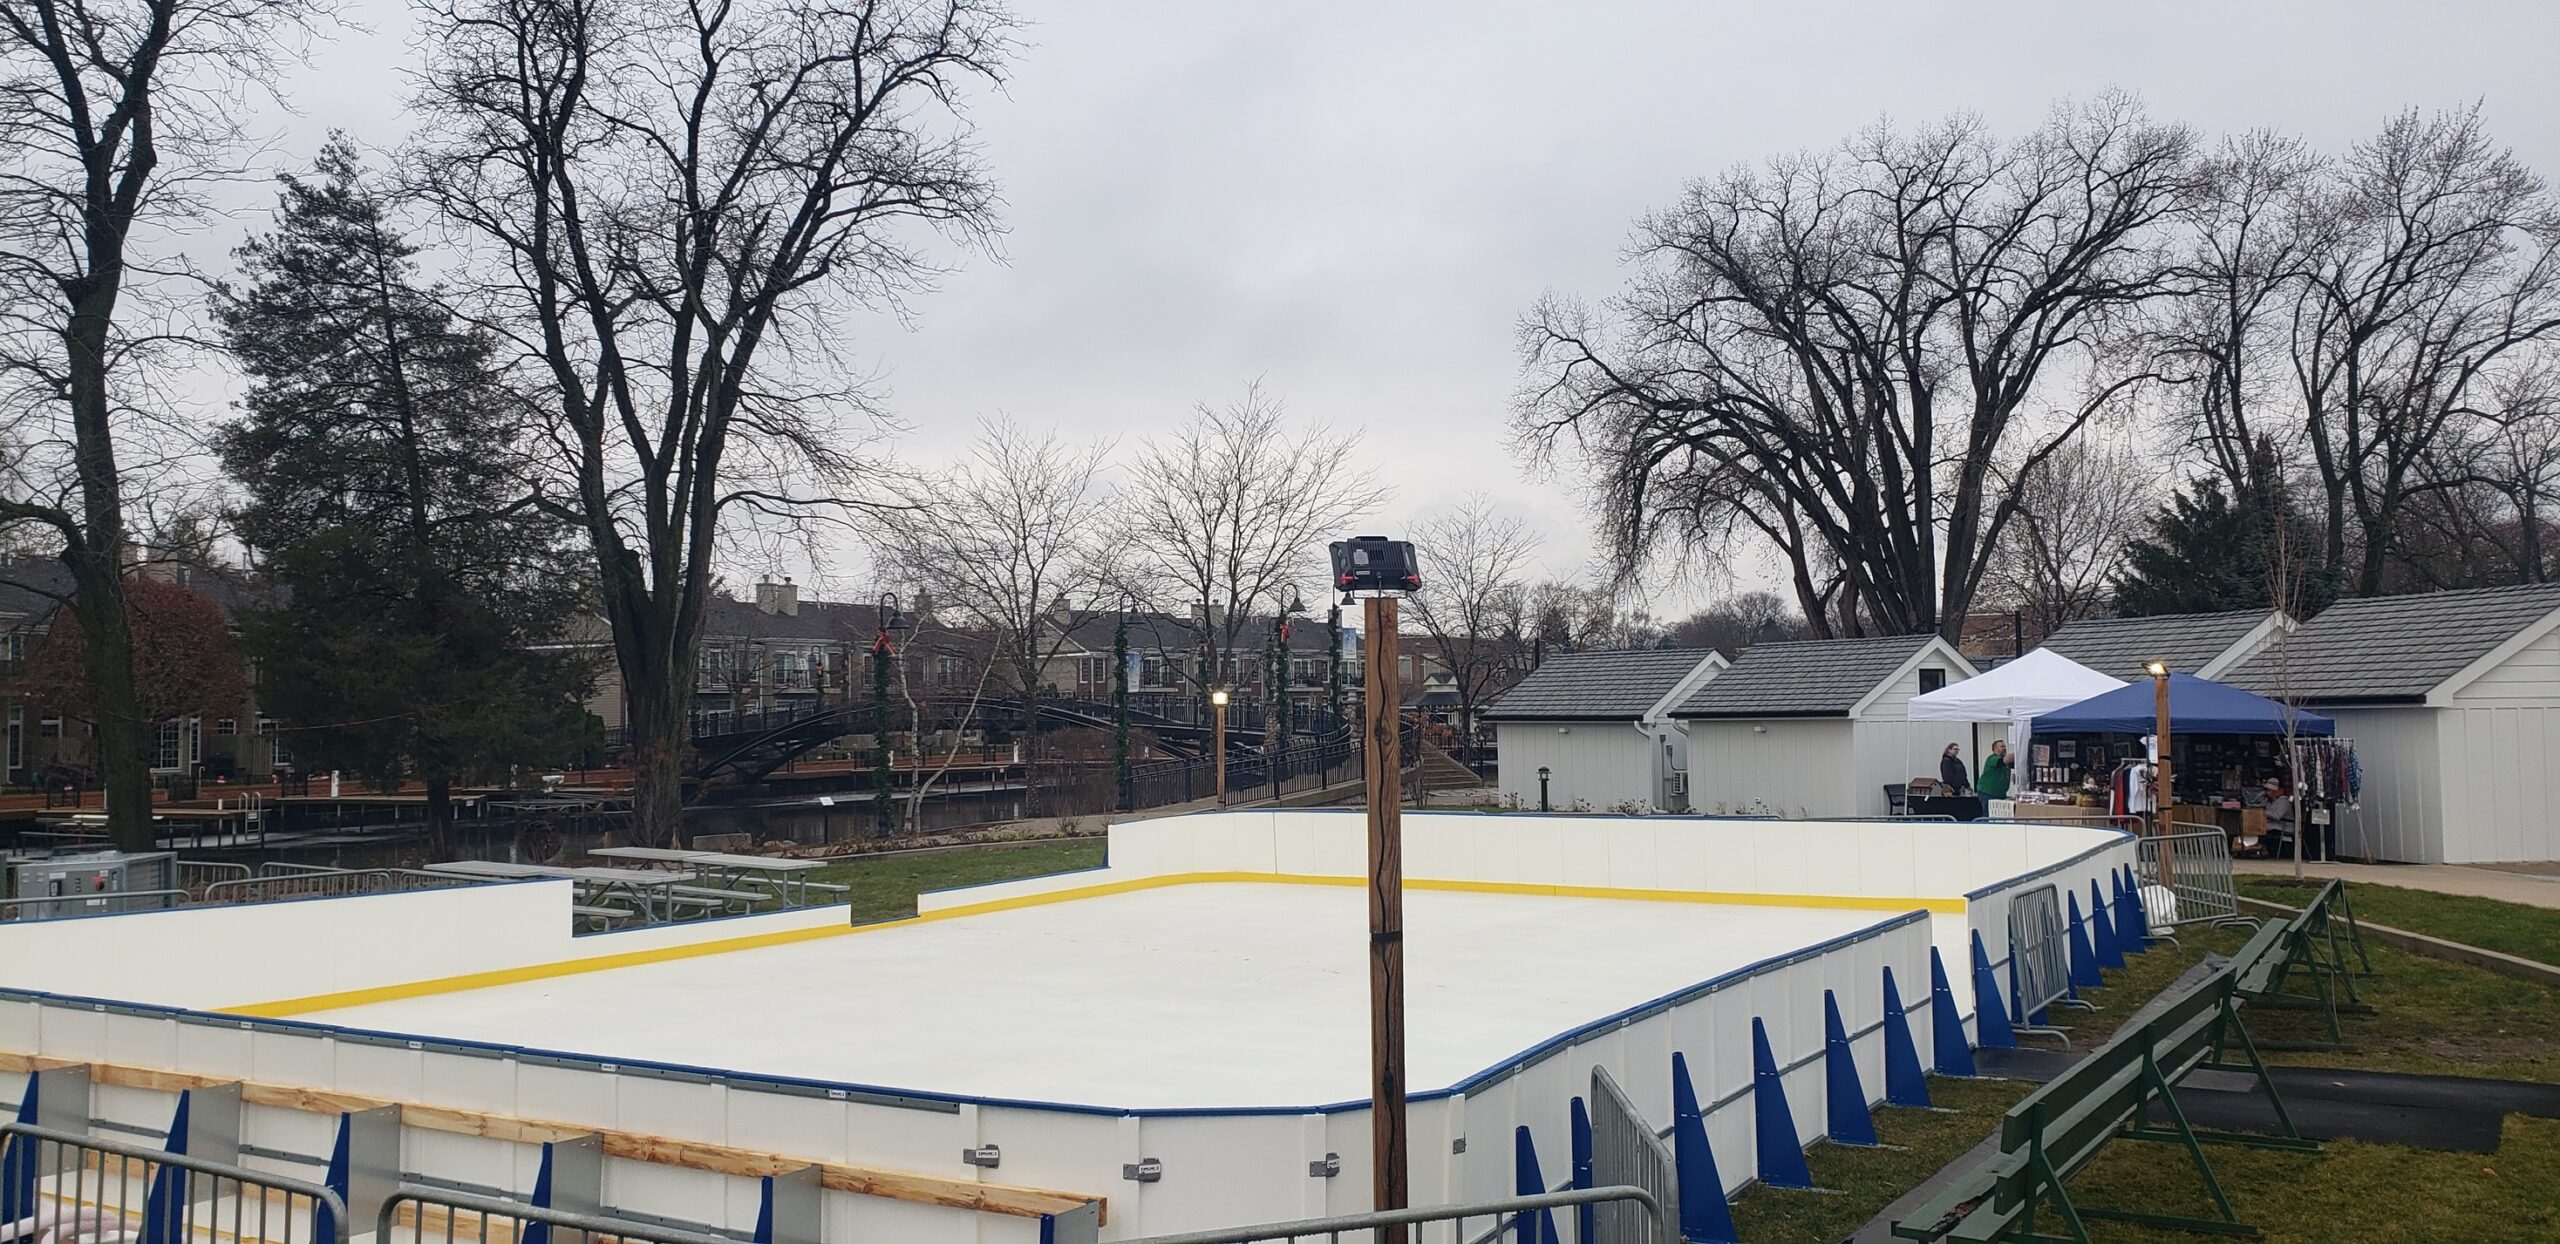 An ice skating rink at Miller Point Park in McHenry officially opened on Dec. 2 and is free to use